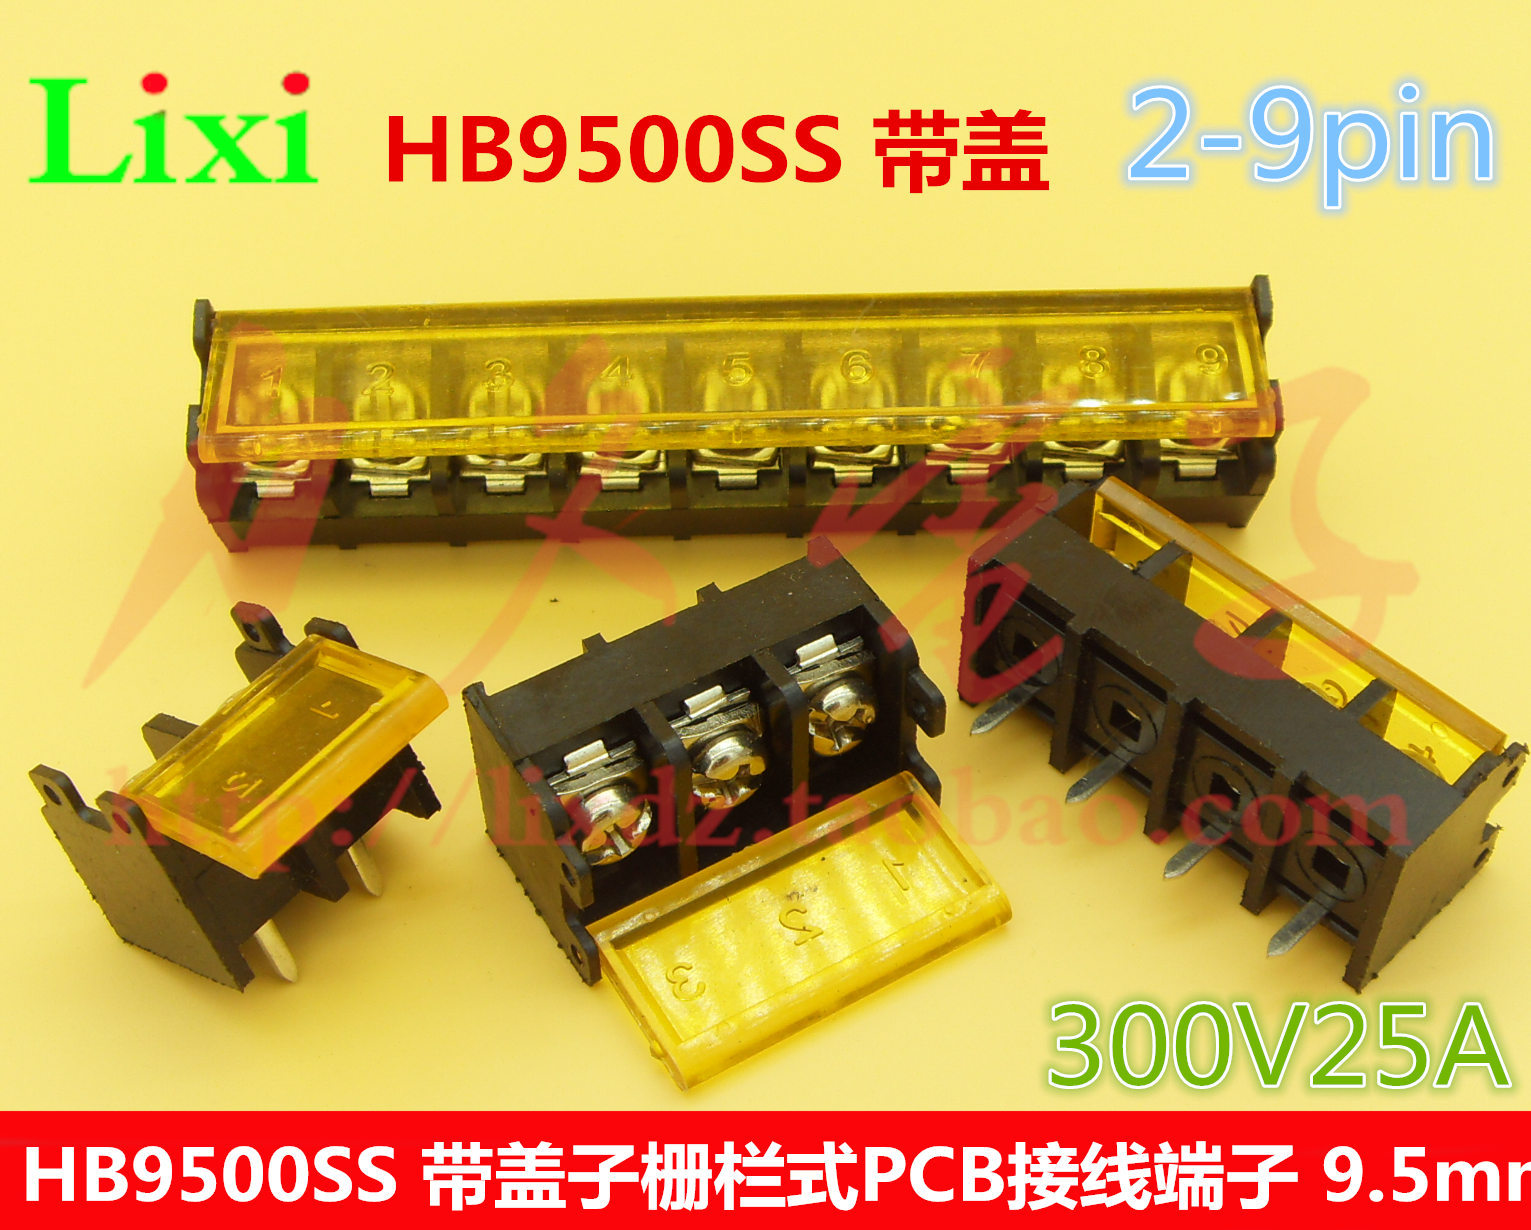 HB9500SS Fence PCB terminal block with c...